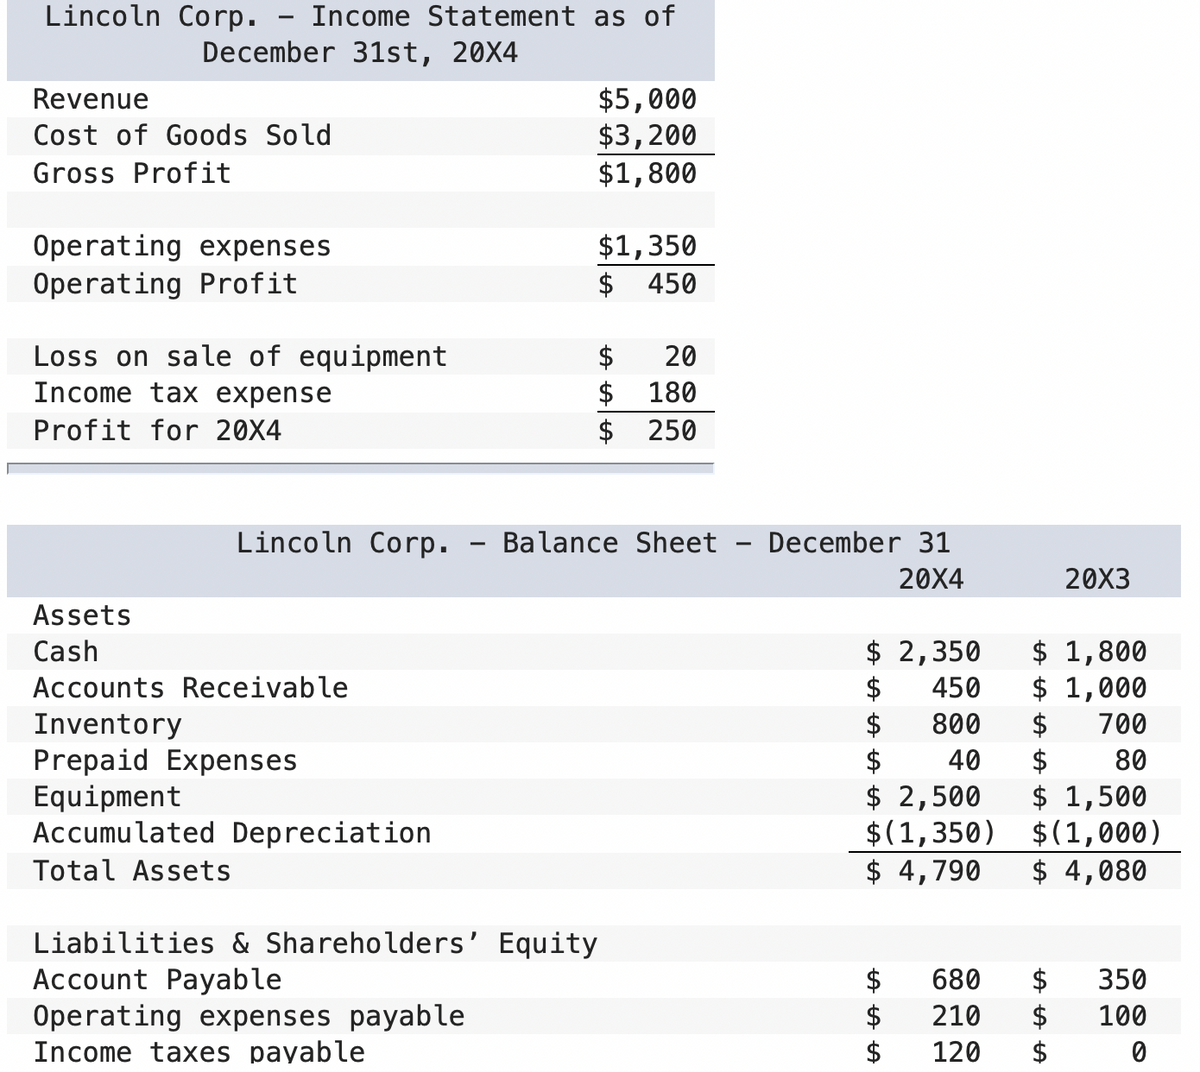 Lincoln Corp. - Income Statement as of
December 31st, 20X4
Revenue
Cost of Goods Sold
Gross Profit
Operating expenses
Operating Profit
Loss on sale of equipment
Income tax expense
Profit for 20X4
Assets
Cash
Lincoln Corp.
Accounts Receivable
Inventory
Prepaid Expenses
Equipment
Accumulated Depreciation
Total Assets
$5,000
$3,200
$1,800
$1,350
$
450
$
$
$
20
180
250
Balance Sheet December 31
20X4
Liabilities & Shareholders' Equity
Account Payable
Operating expenses payable
Income taxes payable
$ 2,350
$
$
$
$ 2,500
$(1,350)
$ 4,790
680
210
$ 120
LA LA LA
450
800
40
$
20X3
$ 1,800
$1,000
$ 700
$
80
$ 1,500
$(1,000)
$ 4,080
$
$
$
350
100
0